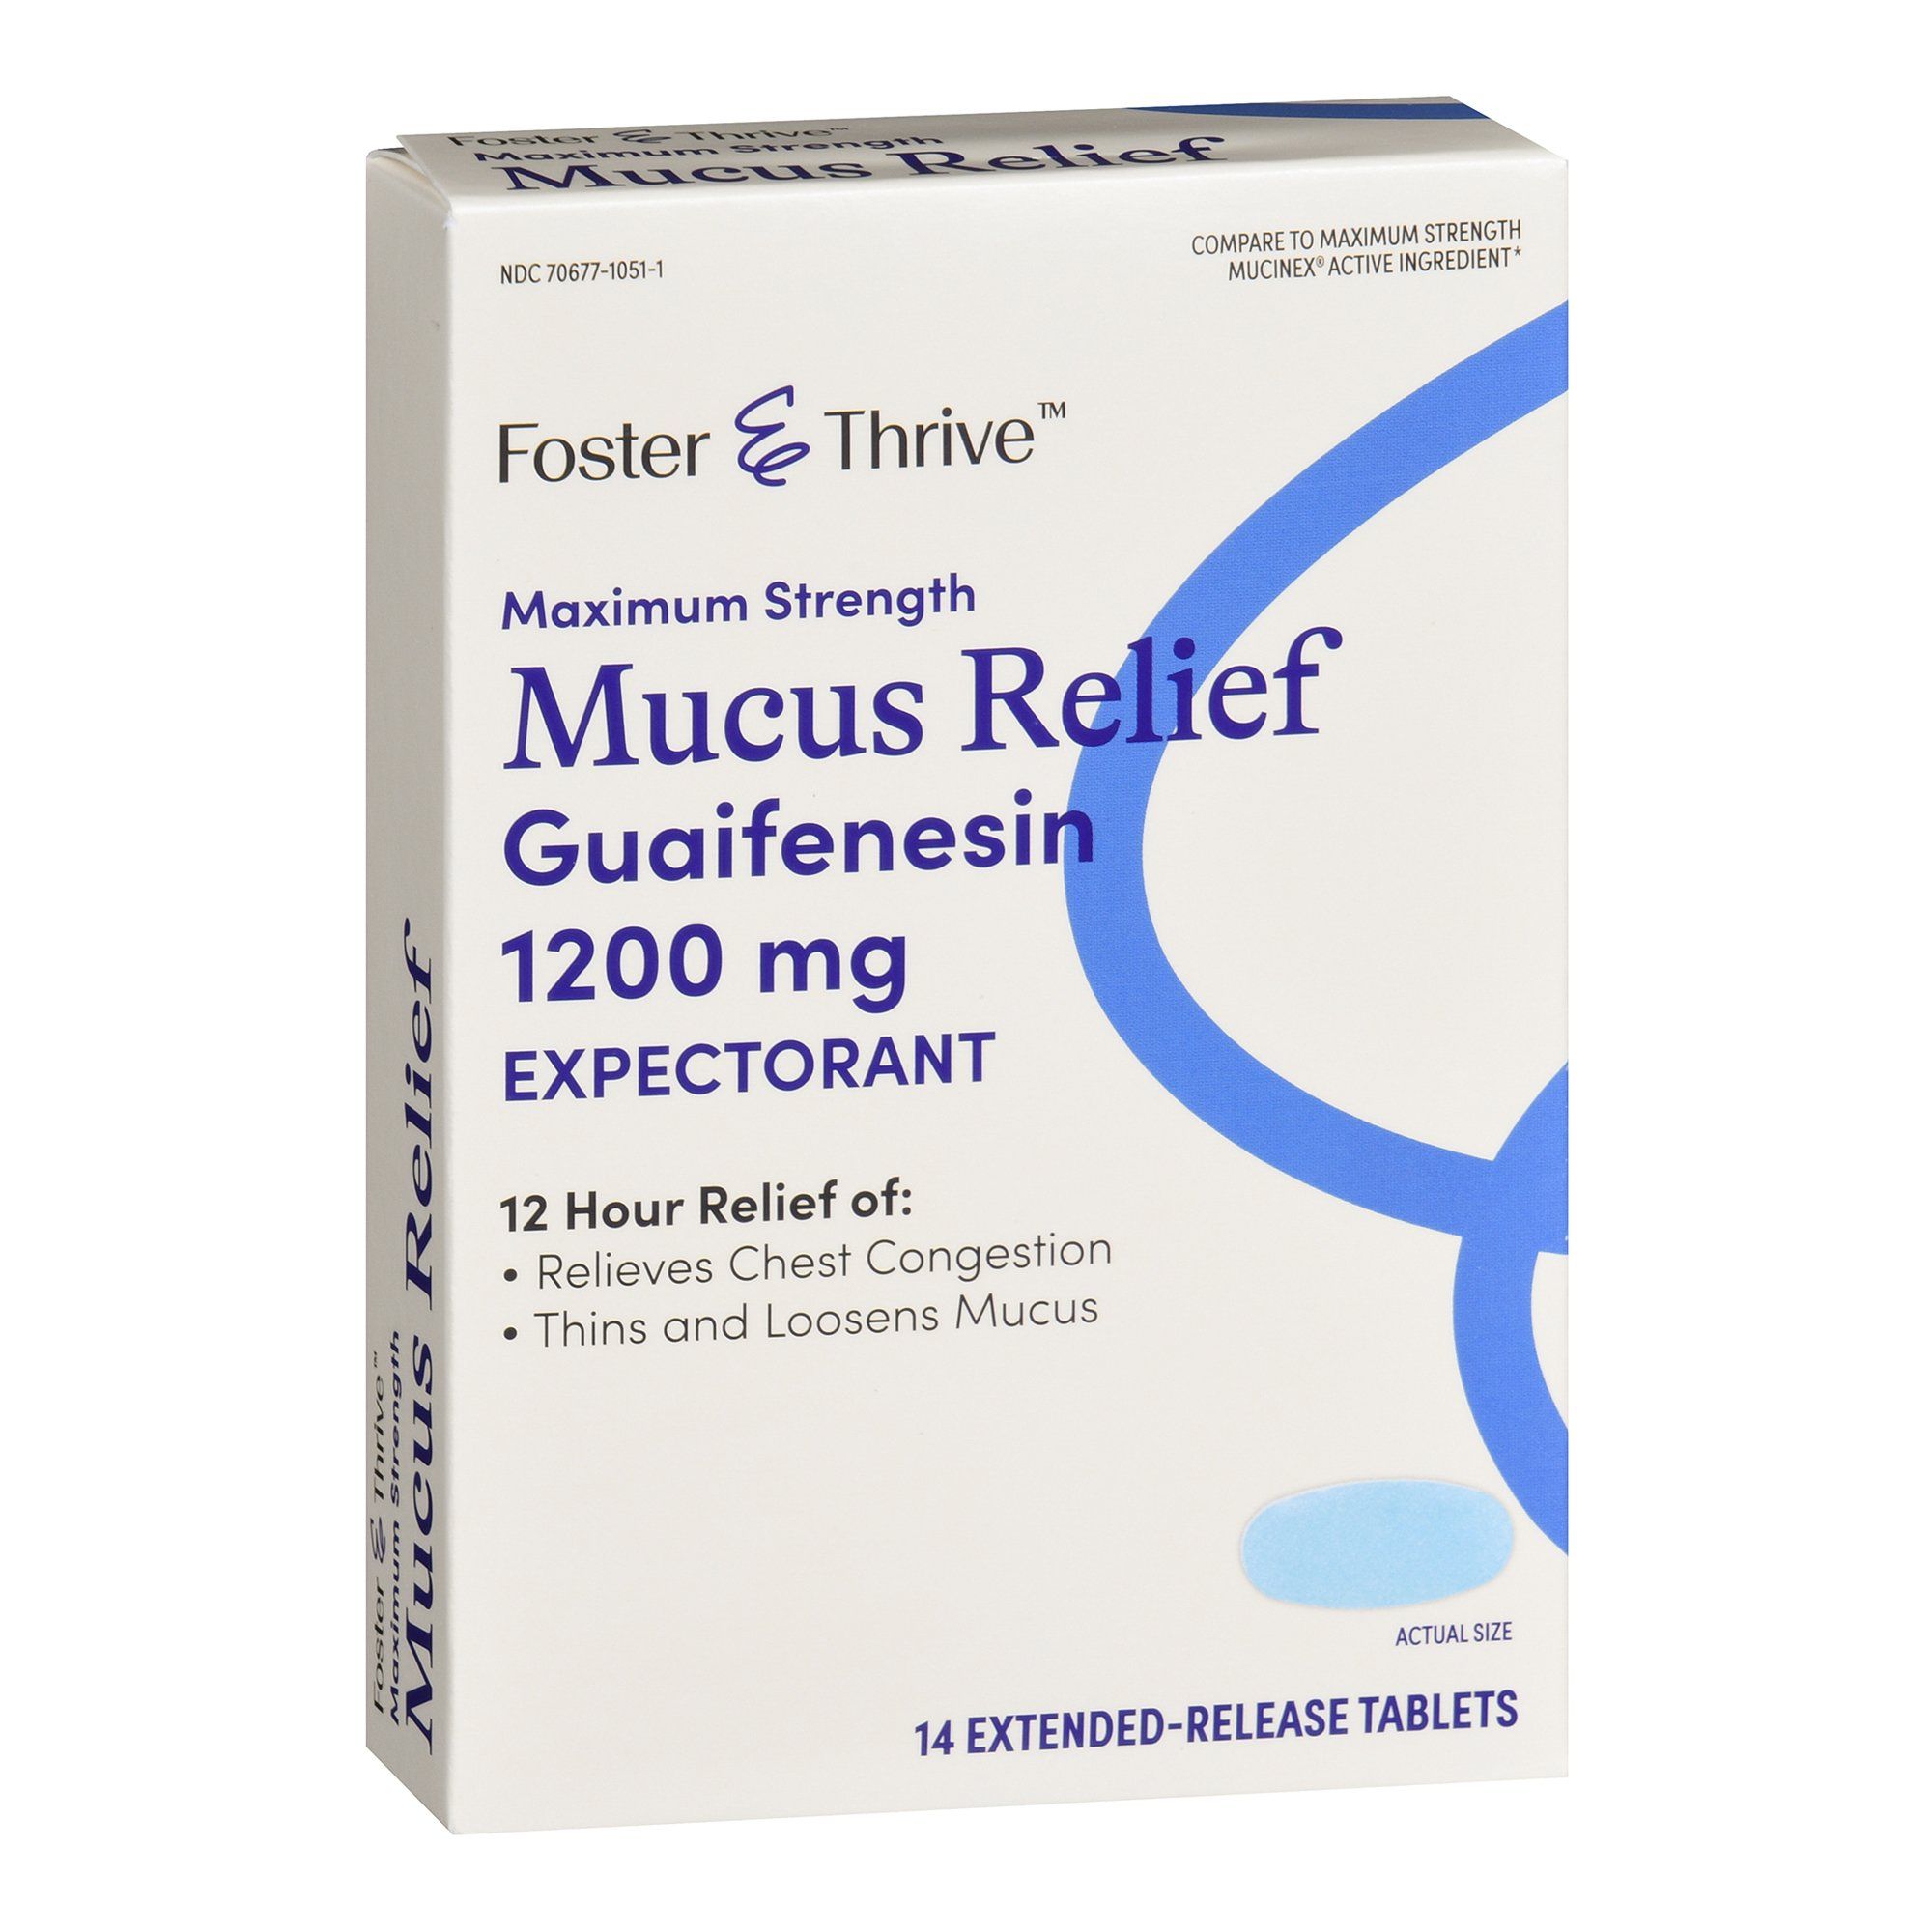 Foster & Thrive Maximum Strength Mucus Relief Guaifenesin Extended-Release Tablets, 1200 mg - 14 ct